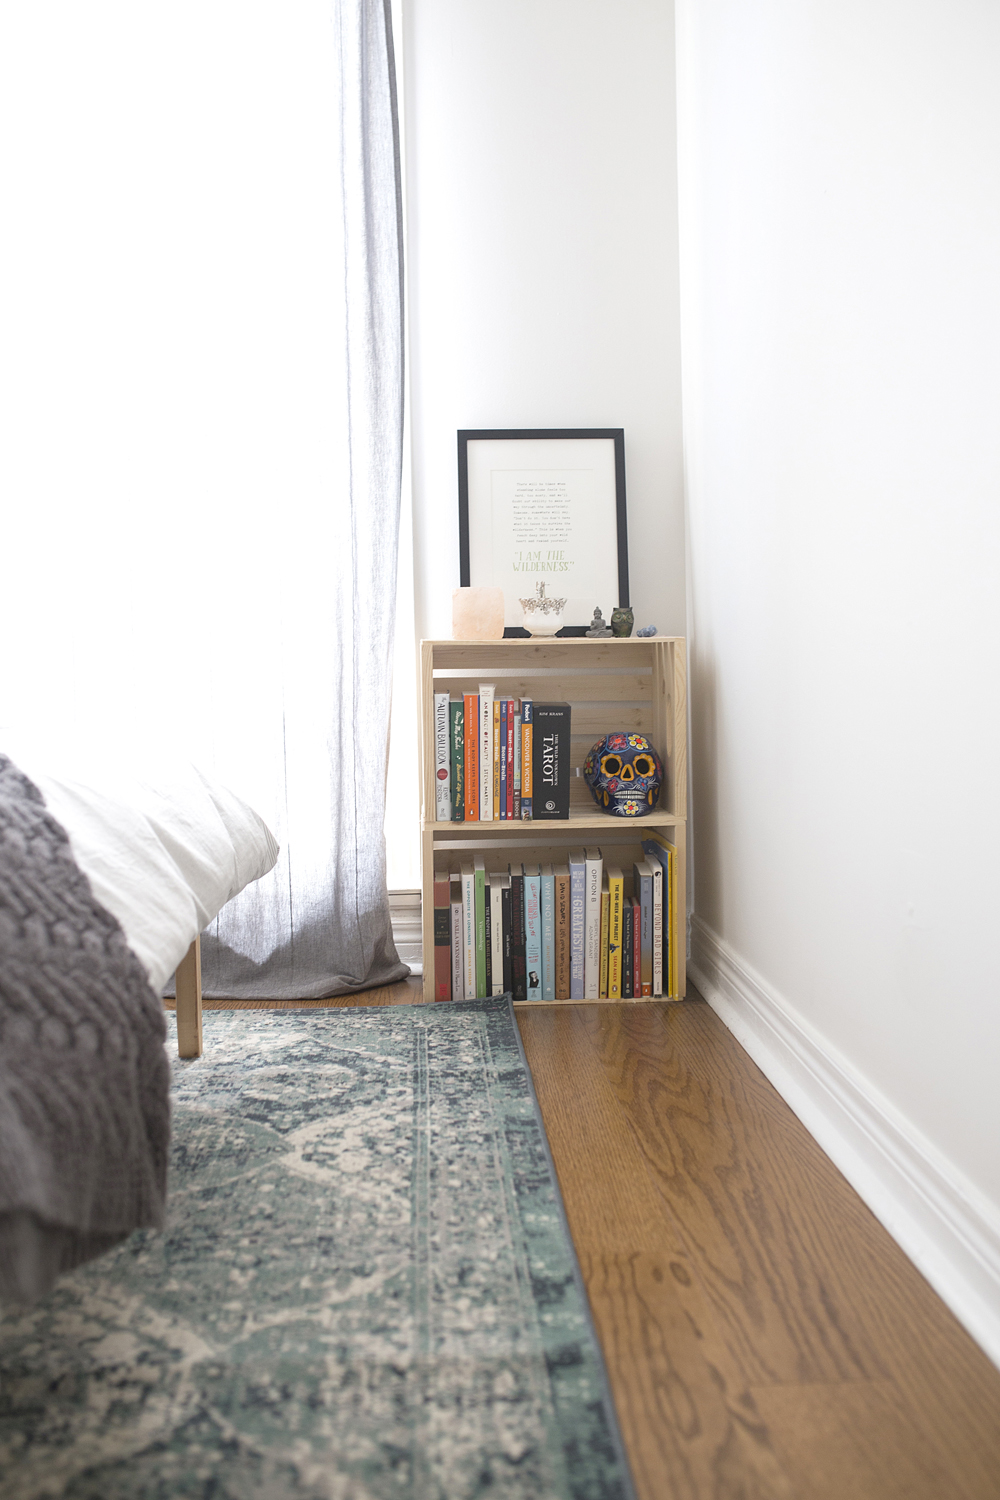 A wooden crate in the corner of the bedroom stands in for bookcases or floating shelves, leaving more room to maneuver